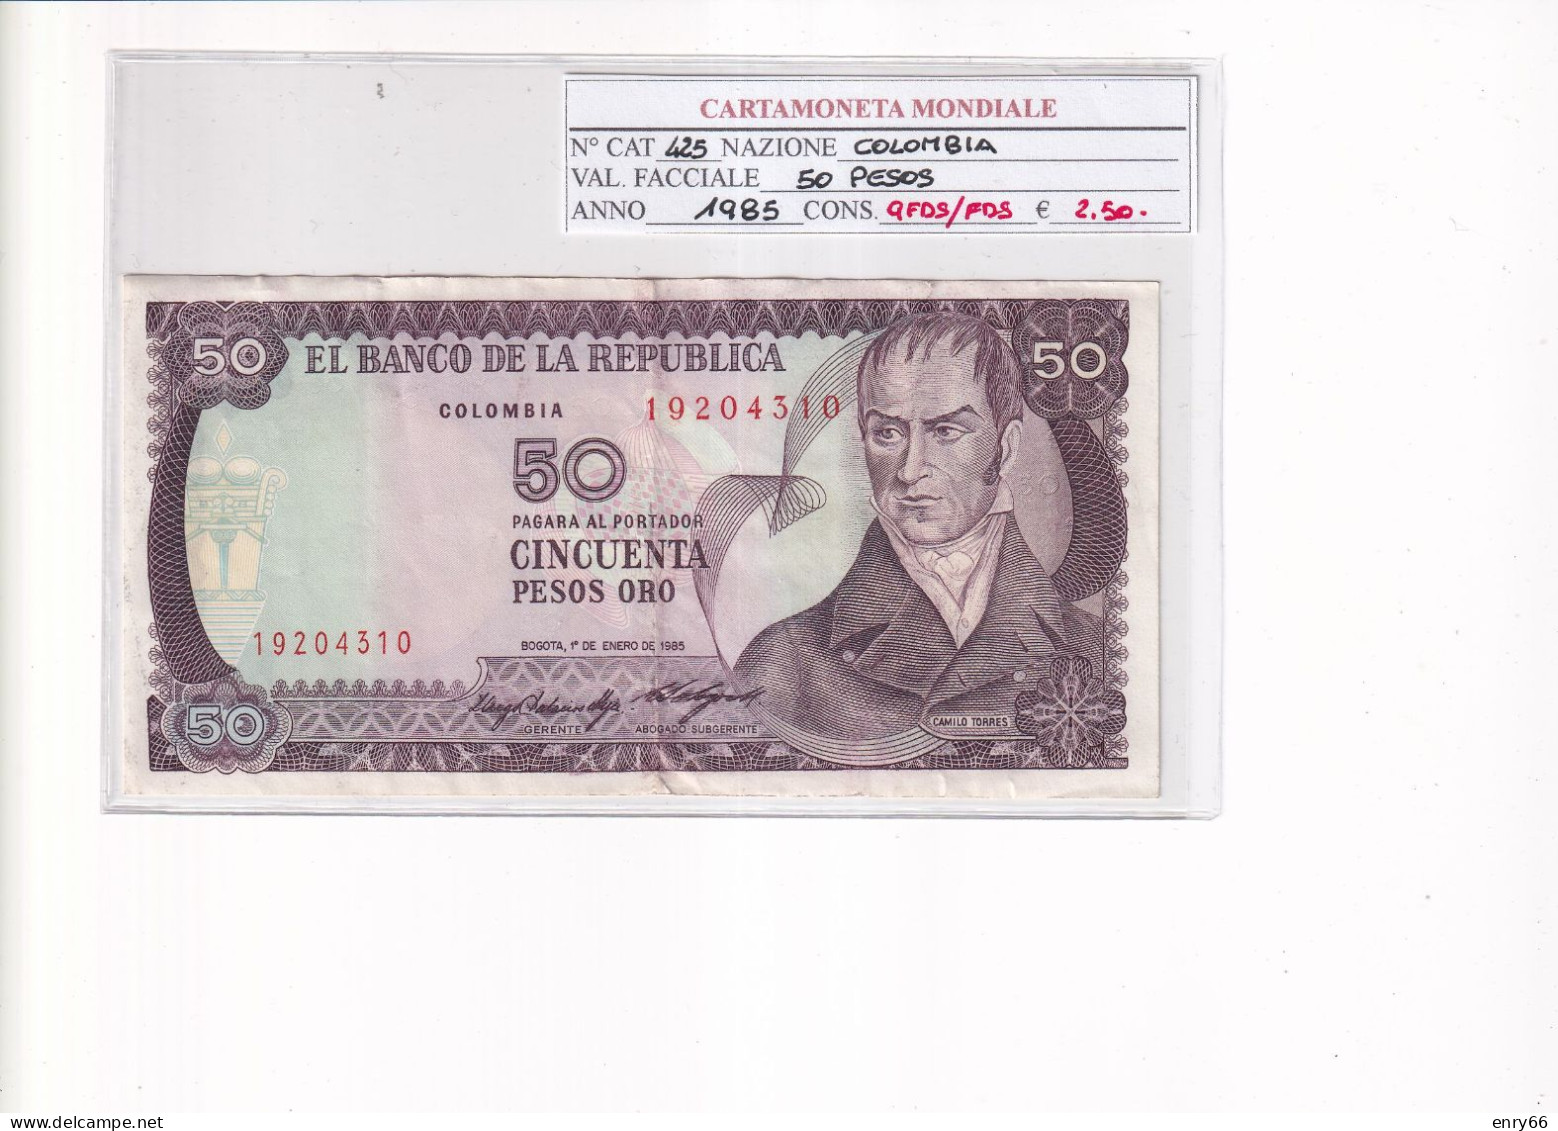 COLOMBIA 50 PESOS 1985 P.425 - Colombie